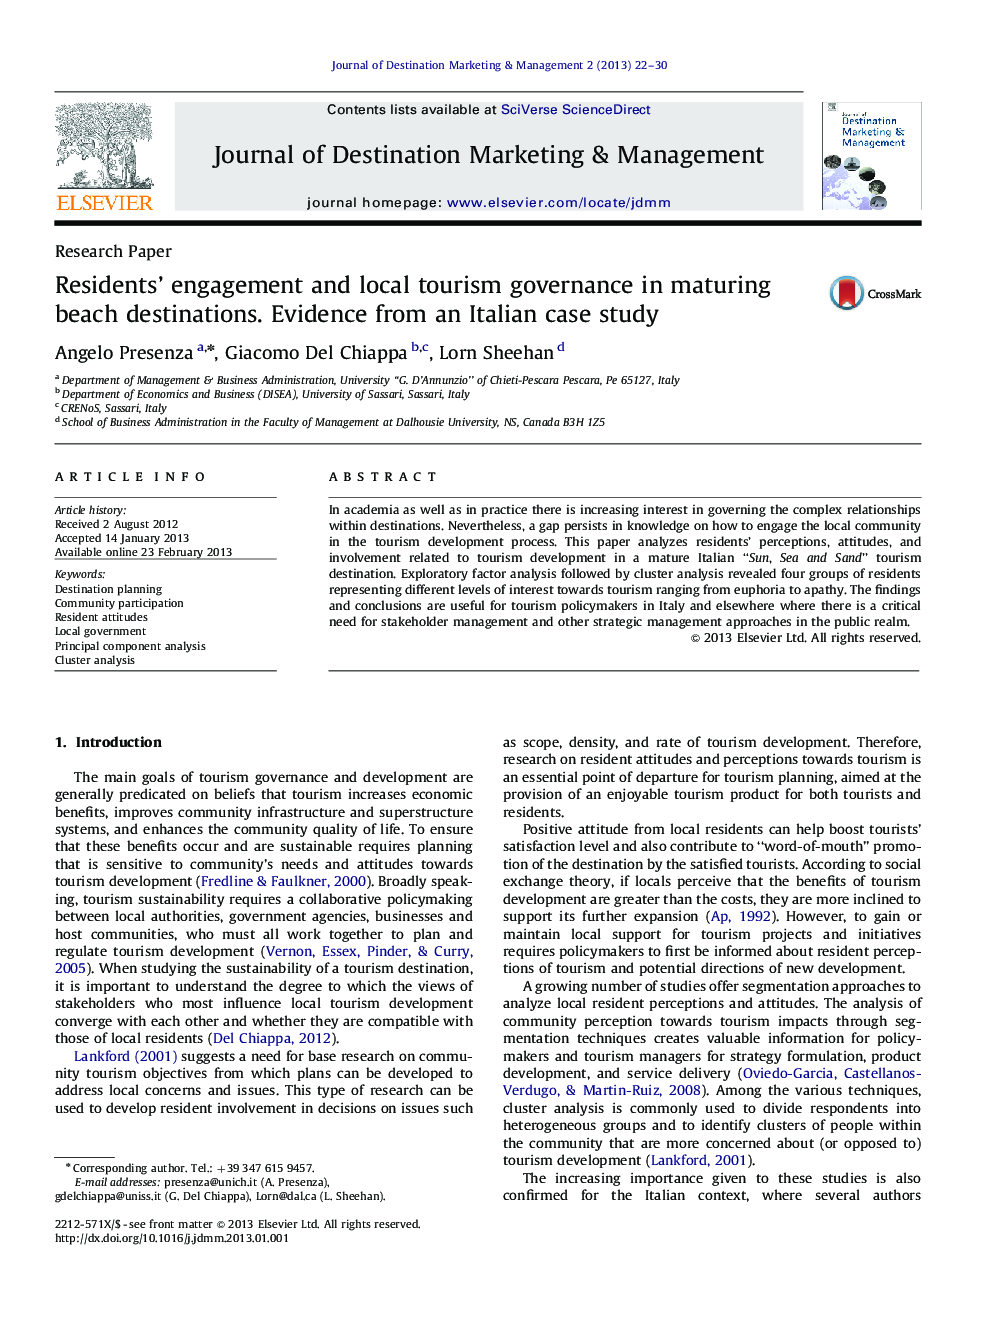 Residents’ engagement and local tourism governance in maturing beach destinations. Evidence from an Italian case study